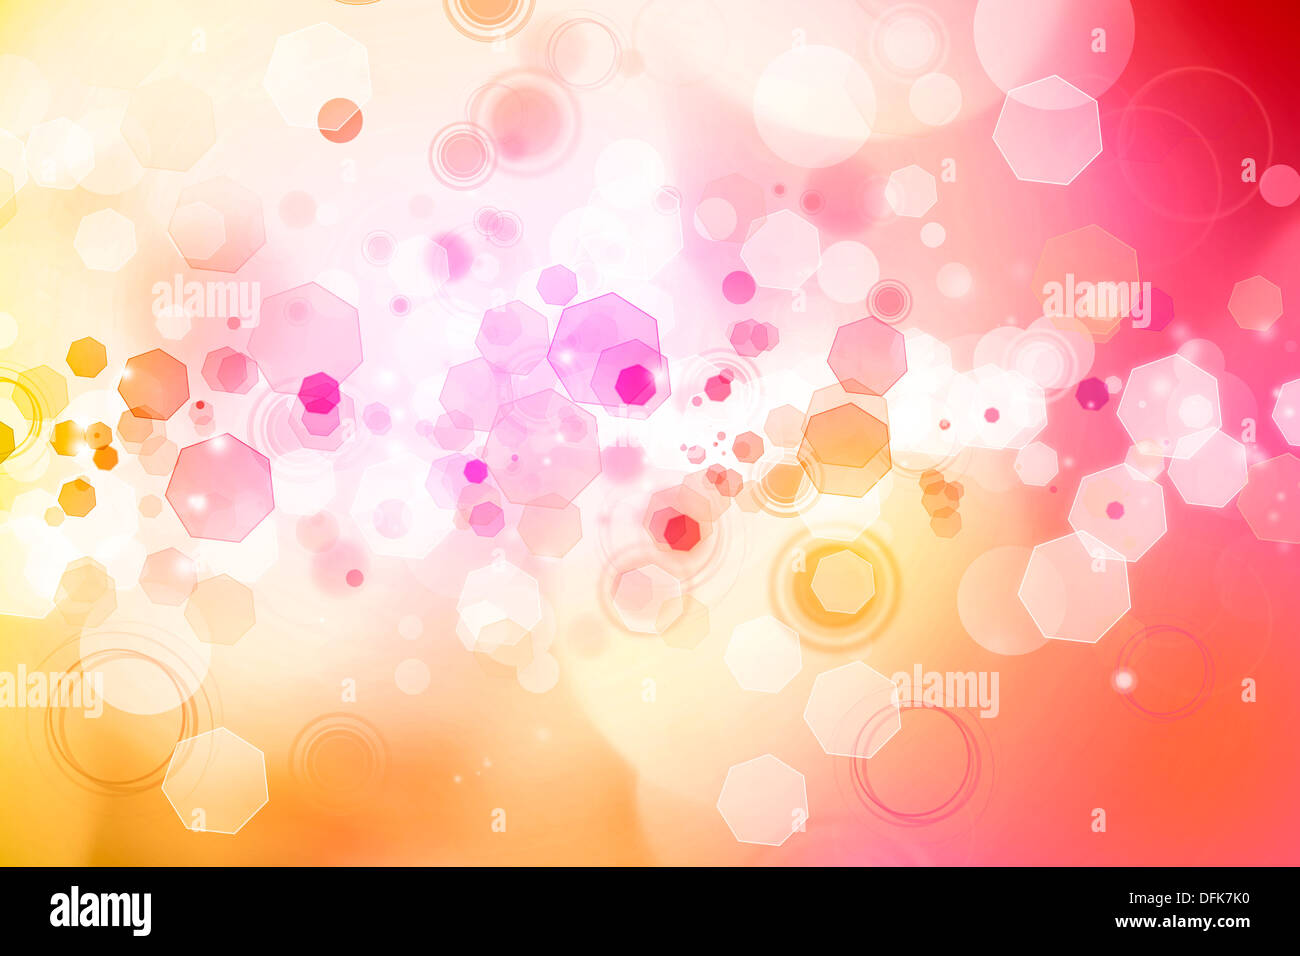 Abstract pink and orange tone background Stock Photo